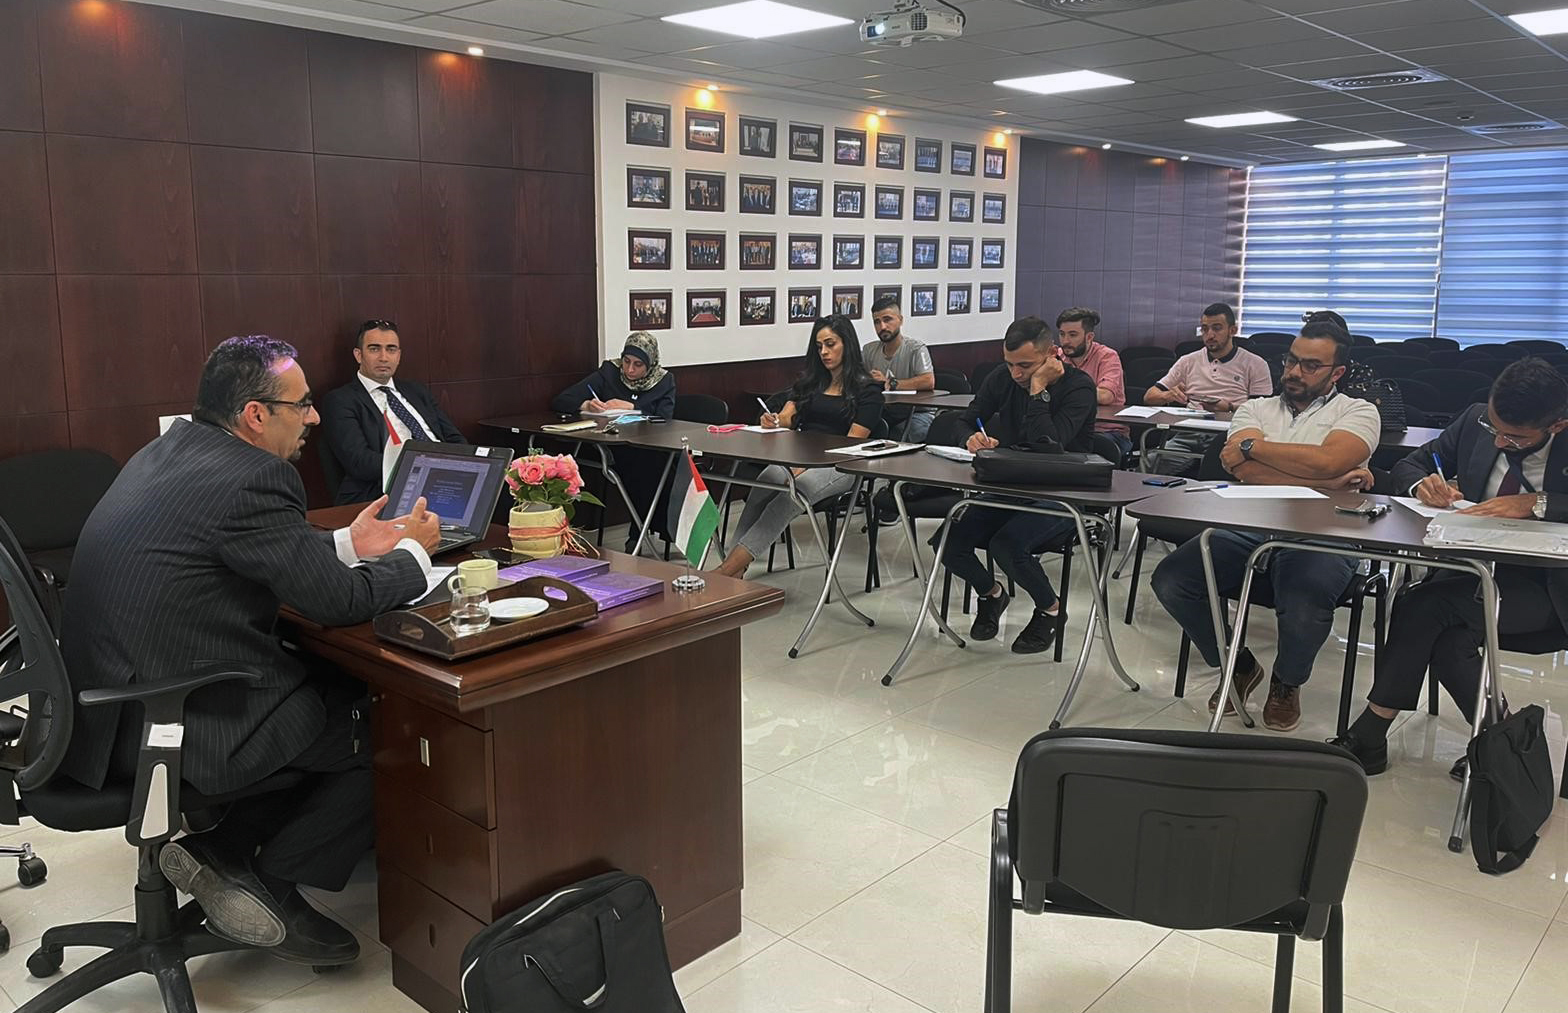 AAUP Organizes a Workshop about “Work Ethics in Auditing” for its Master in Accounting and Auditing Students